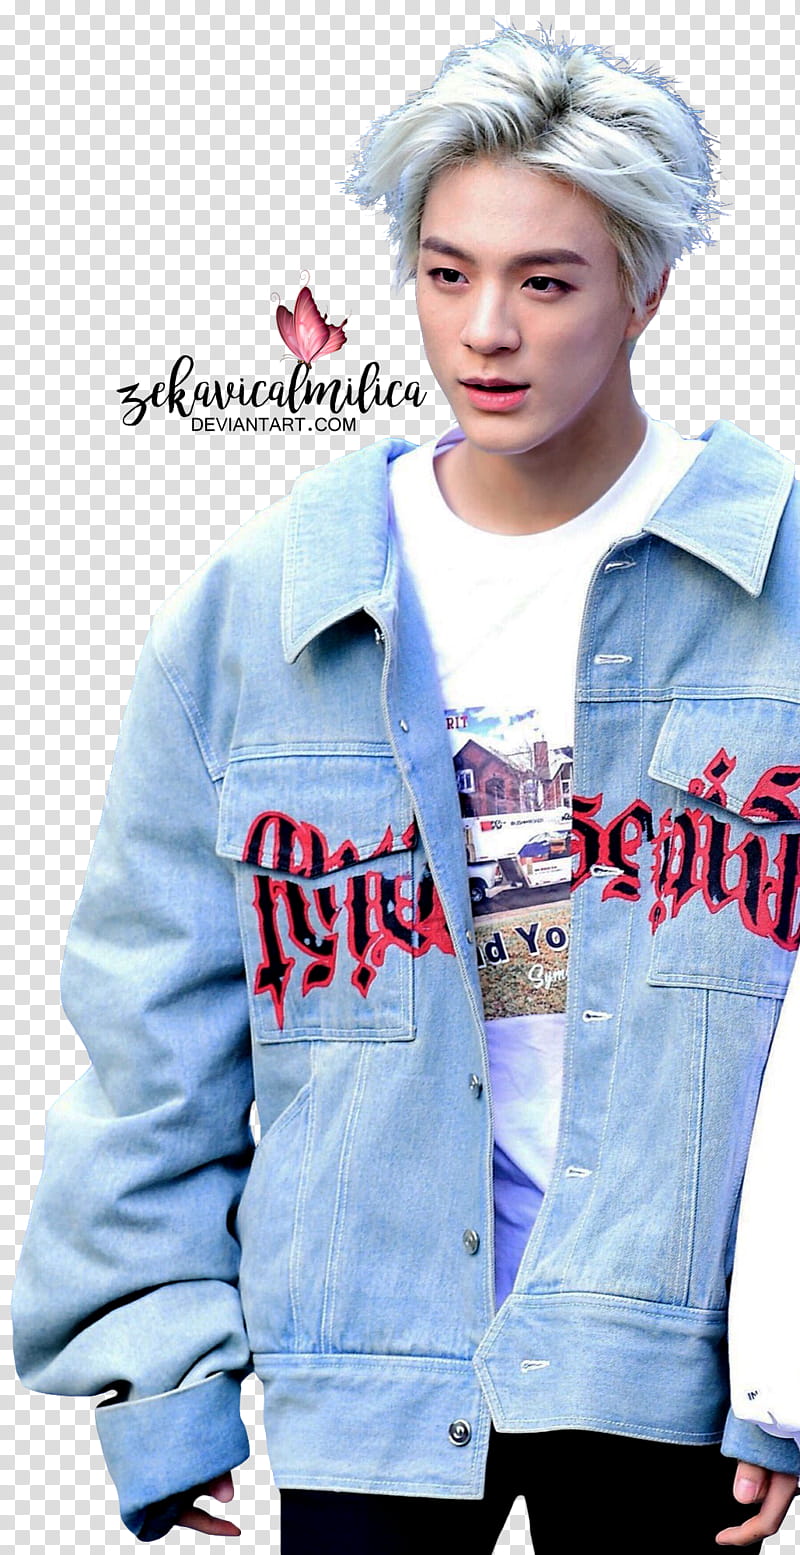 NCT Jeno  KBS Music Bank, man wearing gray denim button-up jacket transparent background PNG clipart